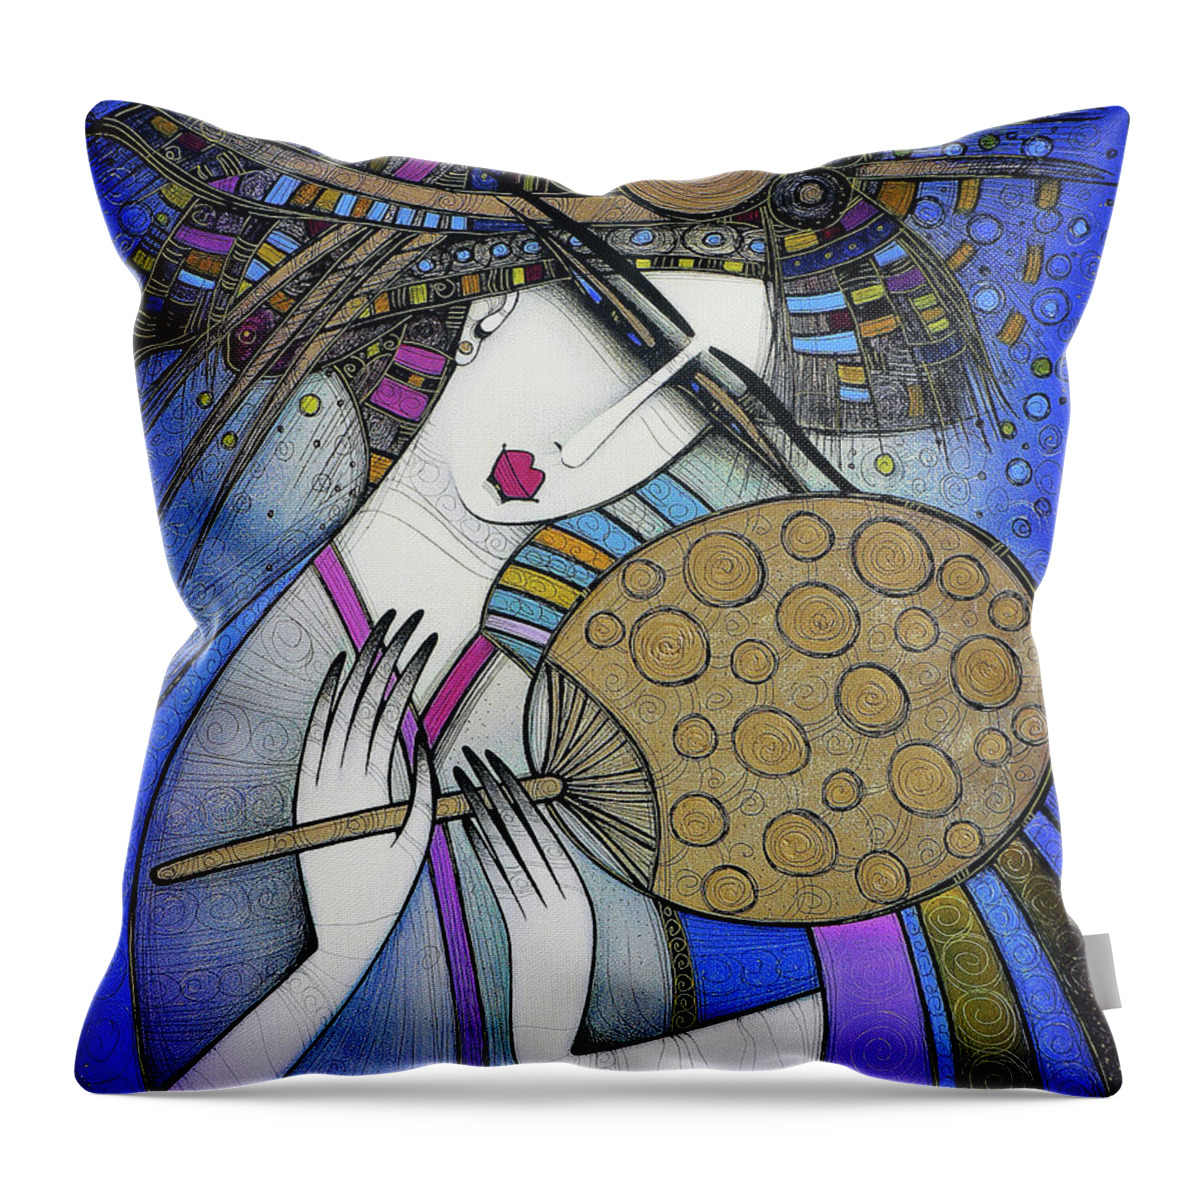 Violet Throw Pillow featuring the painting The fan by Albena Vatcheva